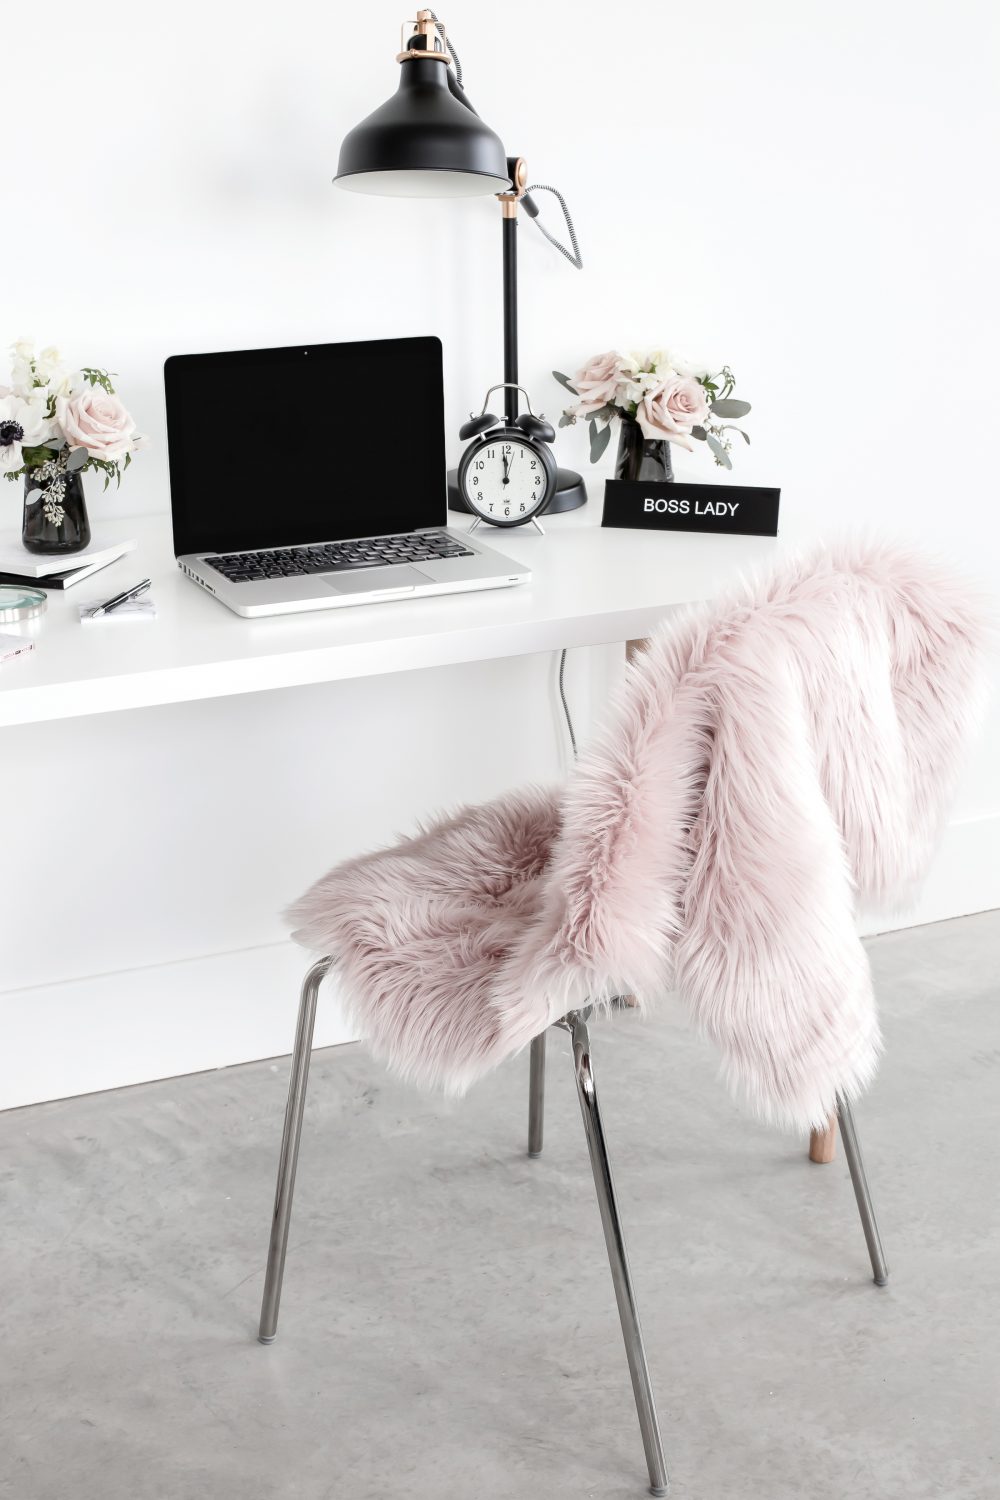 Workspace with blush blanket on chair